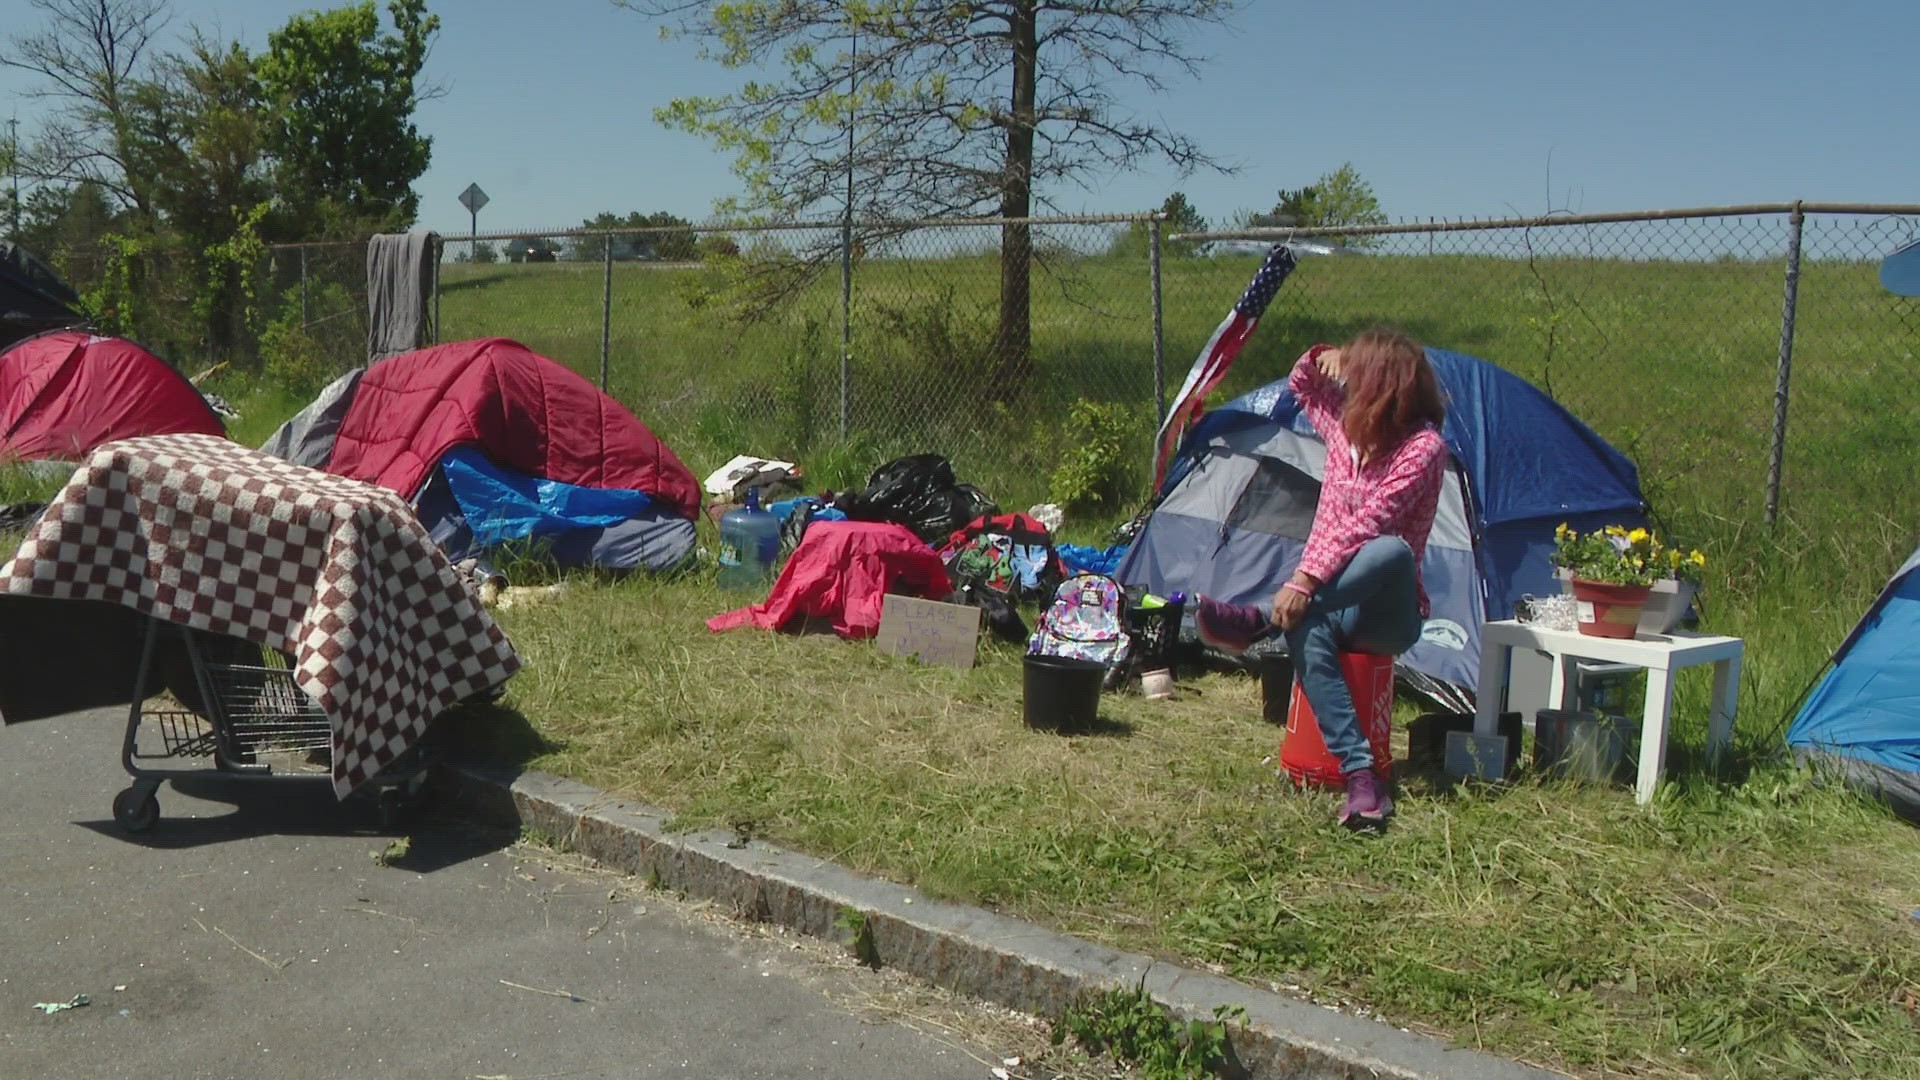 About 40 people experiencing homelessness are tenting at the park-and-ride on Marginal Way in Portland.